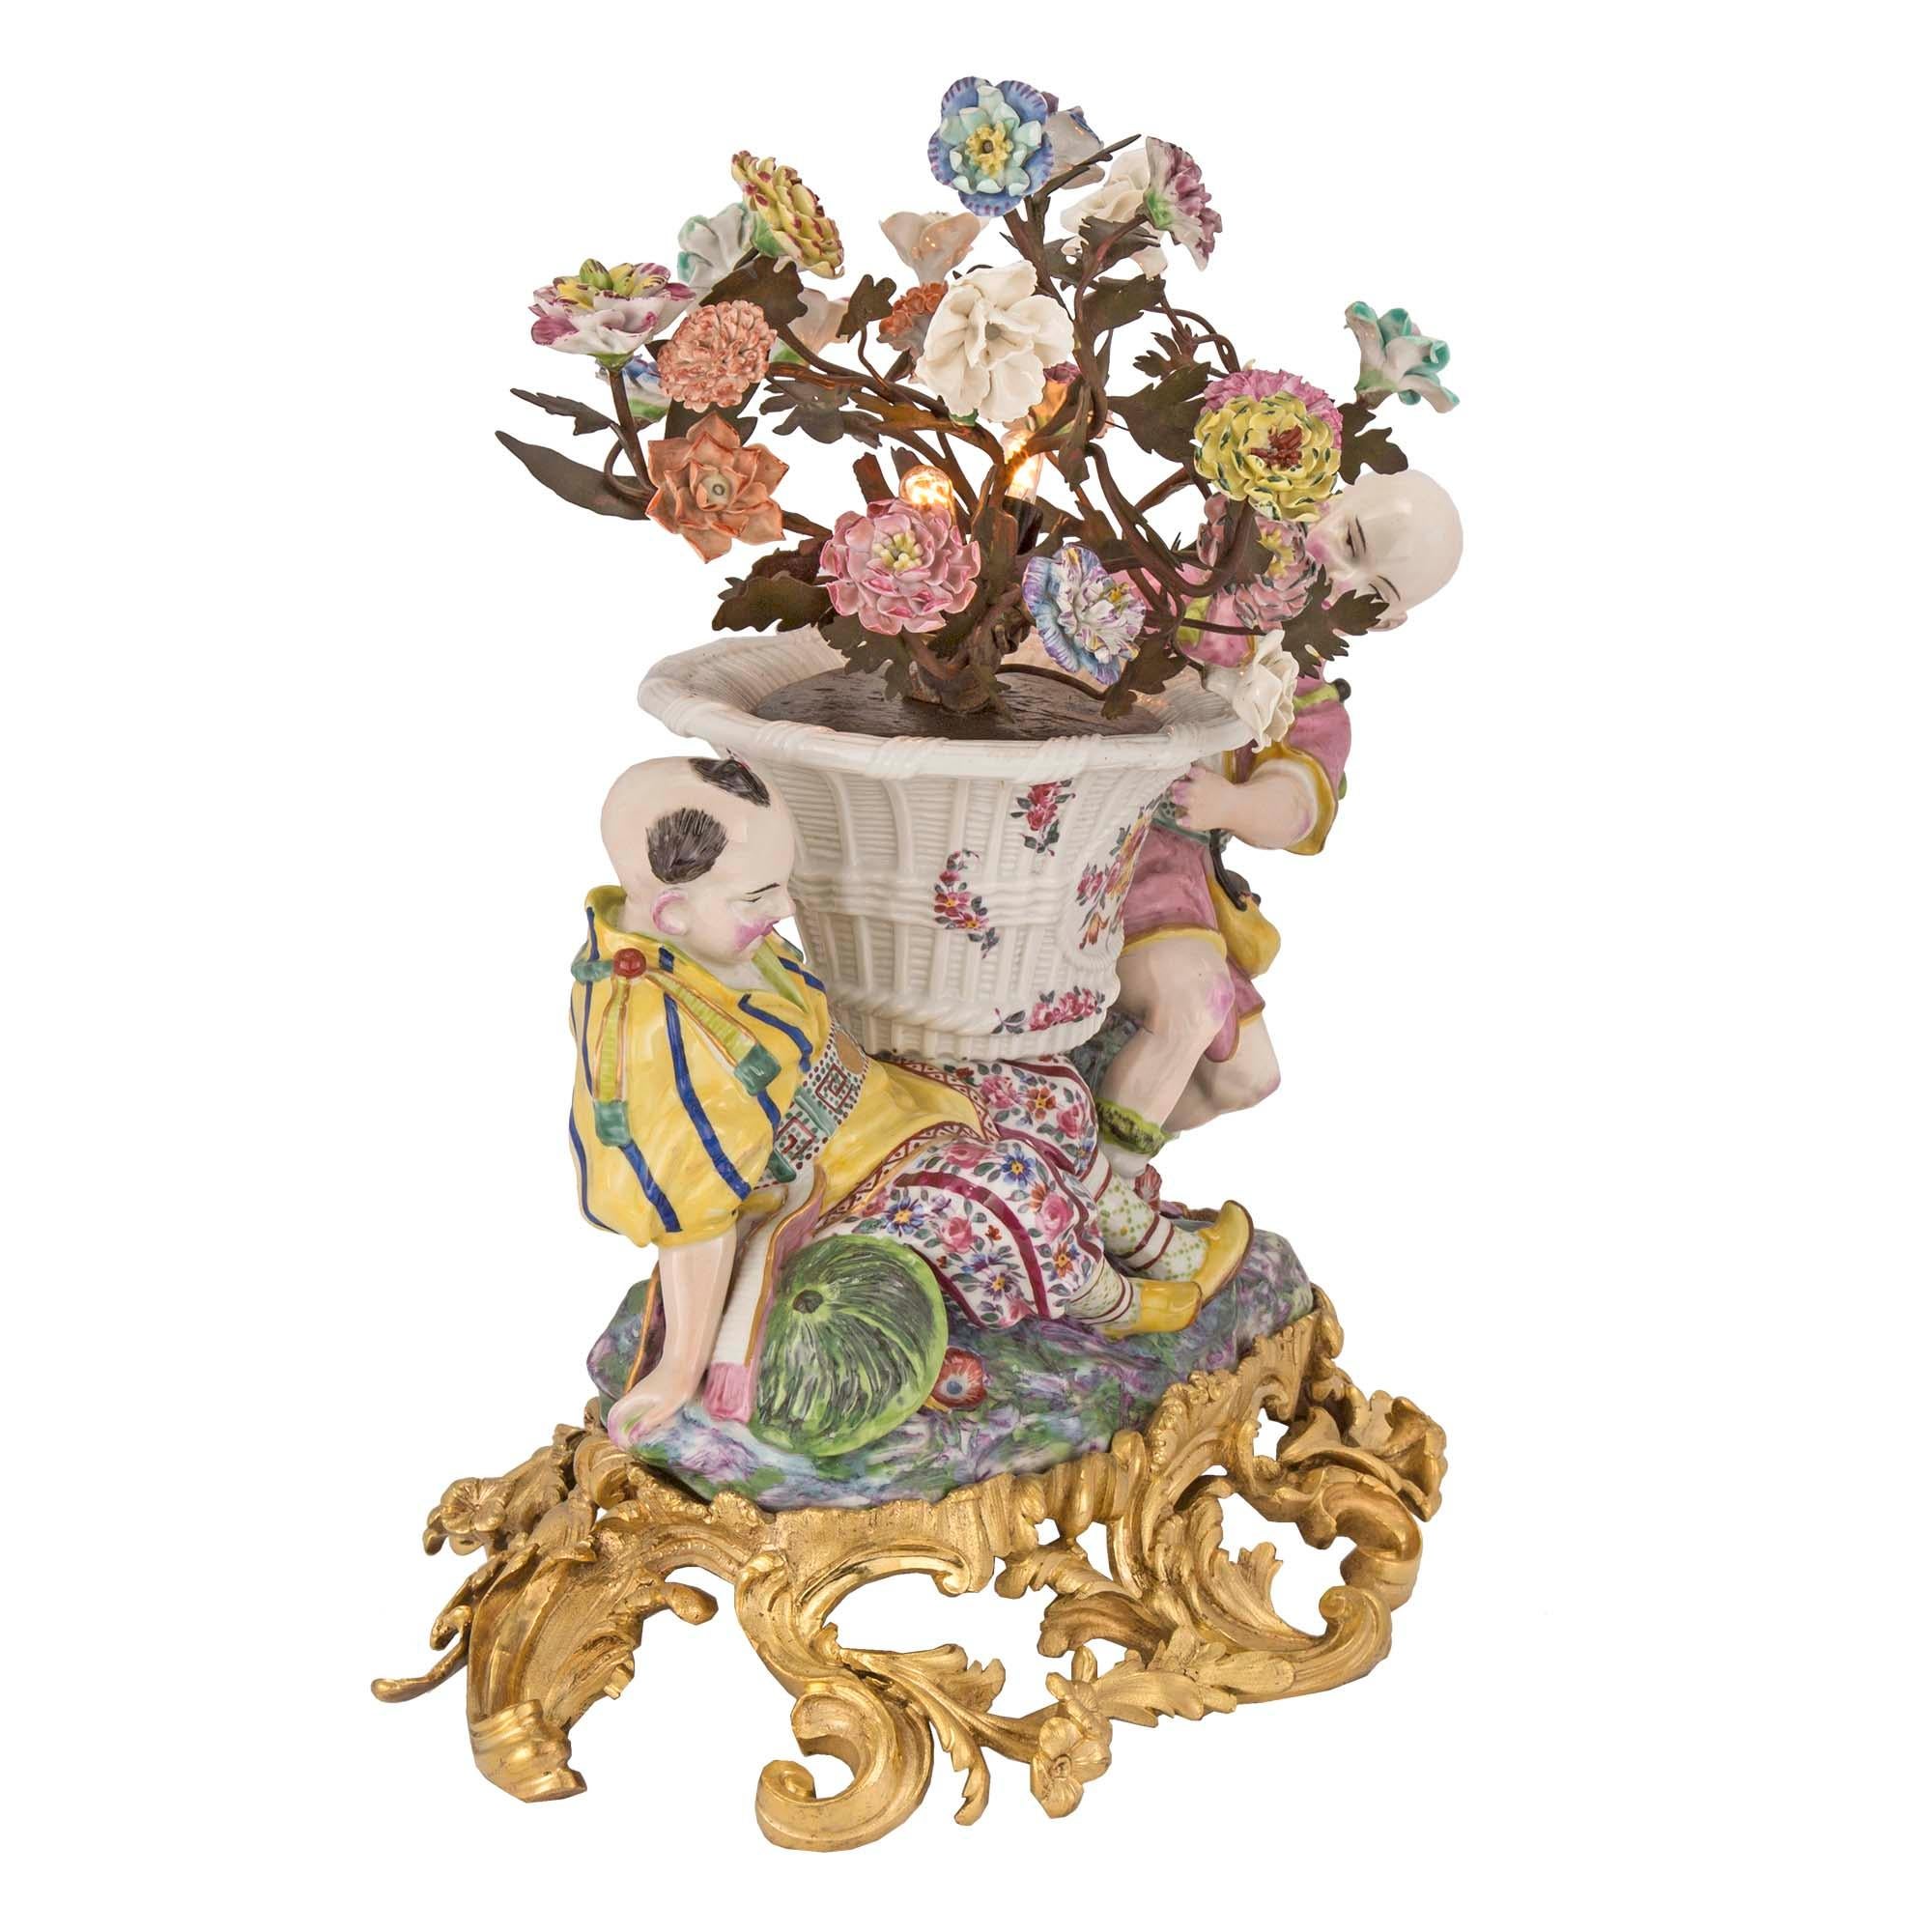 A lovely 19th century Asian export decorative lighted porcelain with French Louis XV st. ormolu base. The pierced finely chased base has wonderfully scrolled foliate all around. The charming porcelain figures above are in traditional attire, with